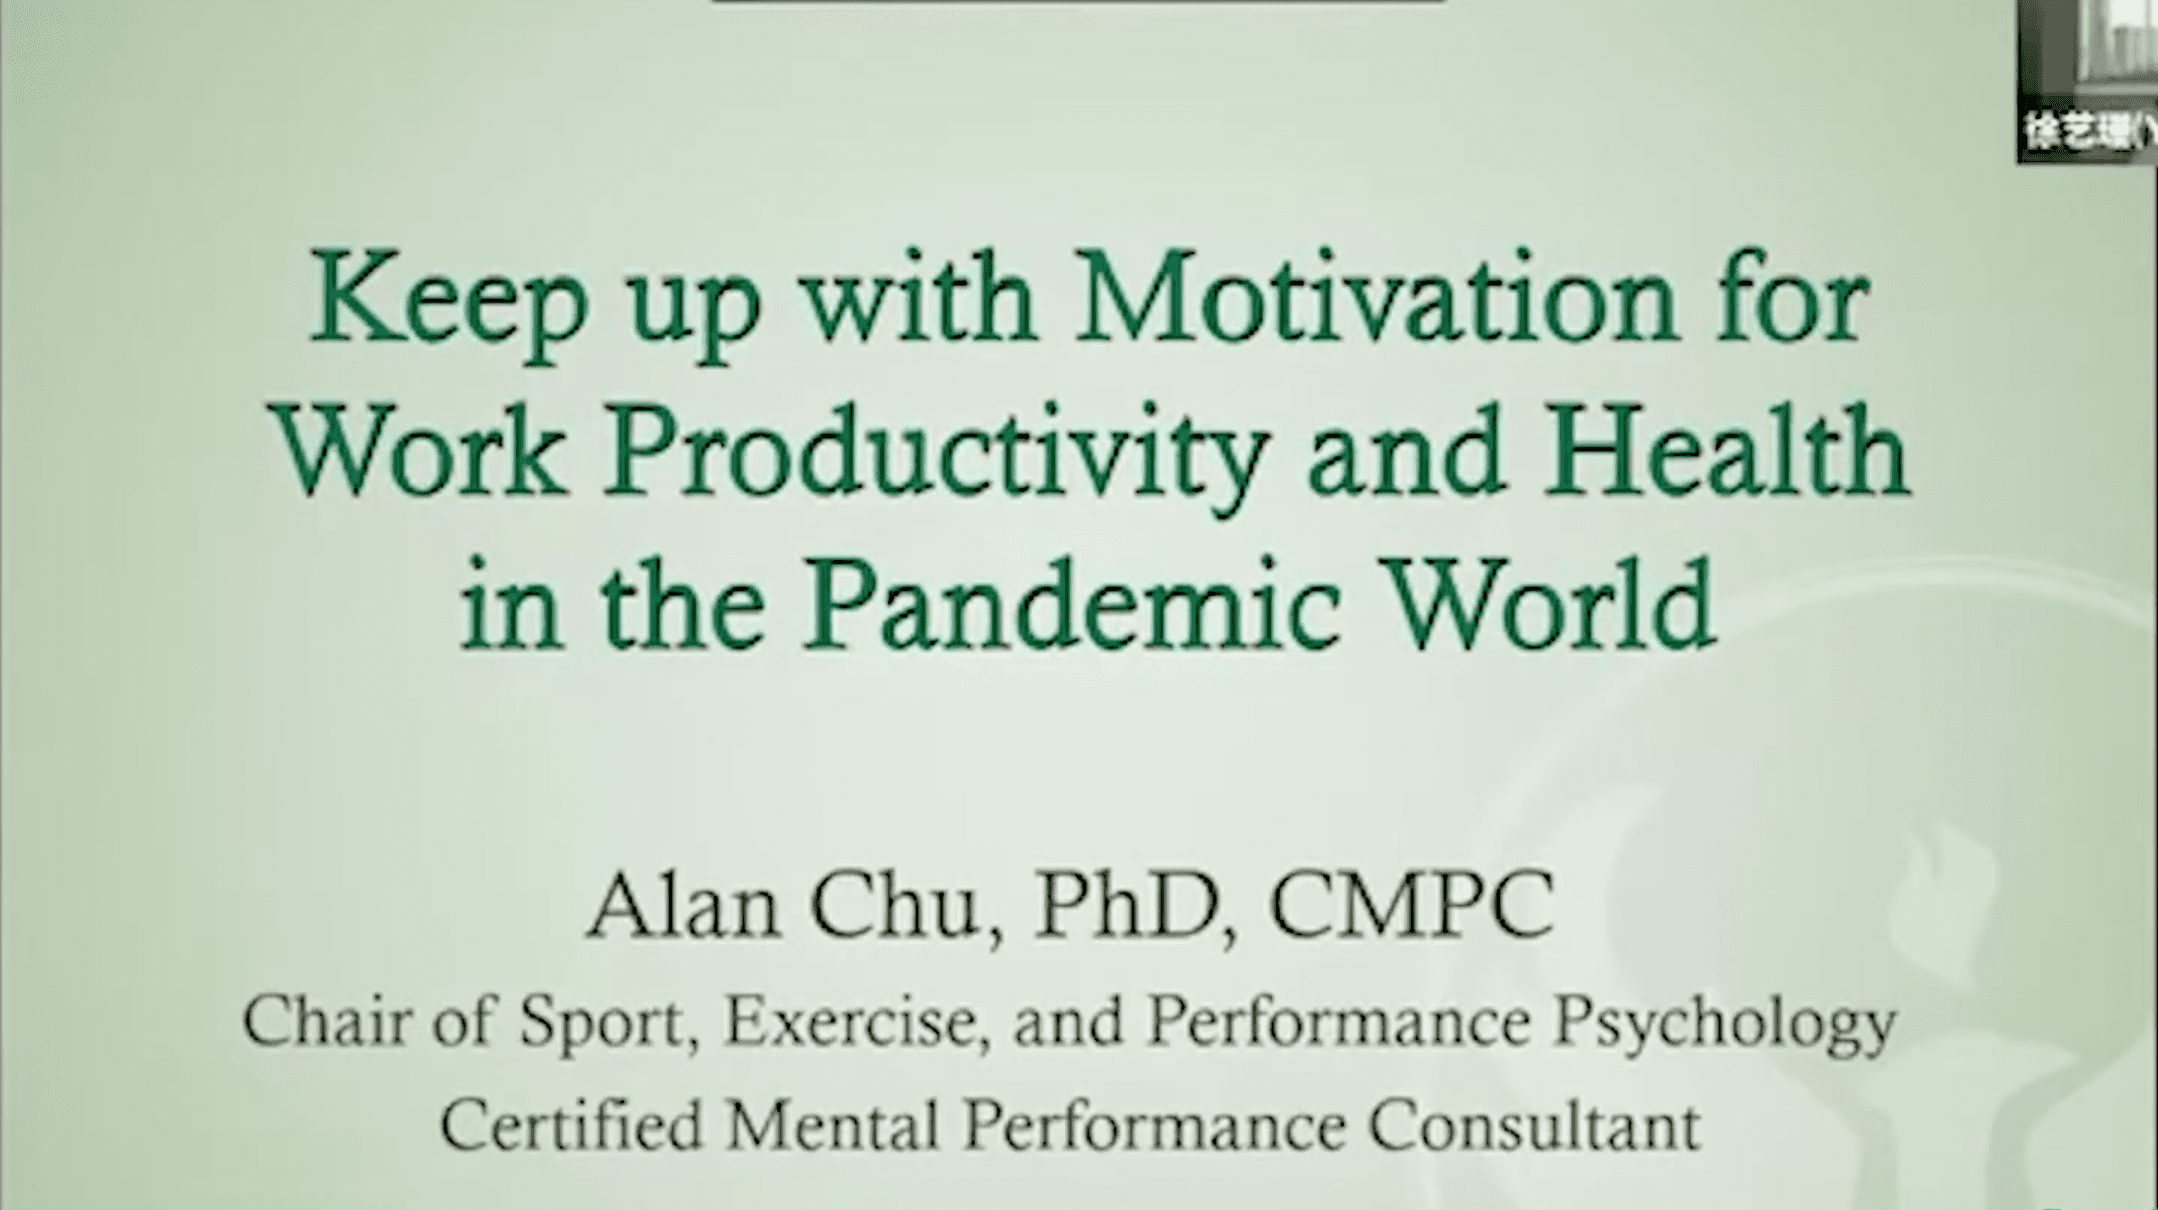 Motivation for Work Productivity  Health in the Pandemic World Lecture by Dr Alan Chu from UWGB